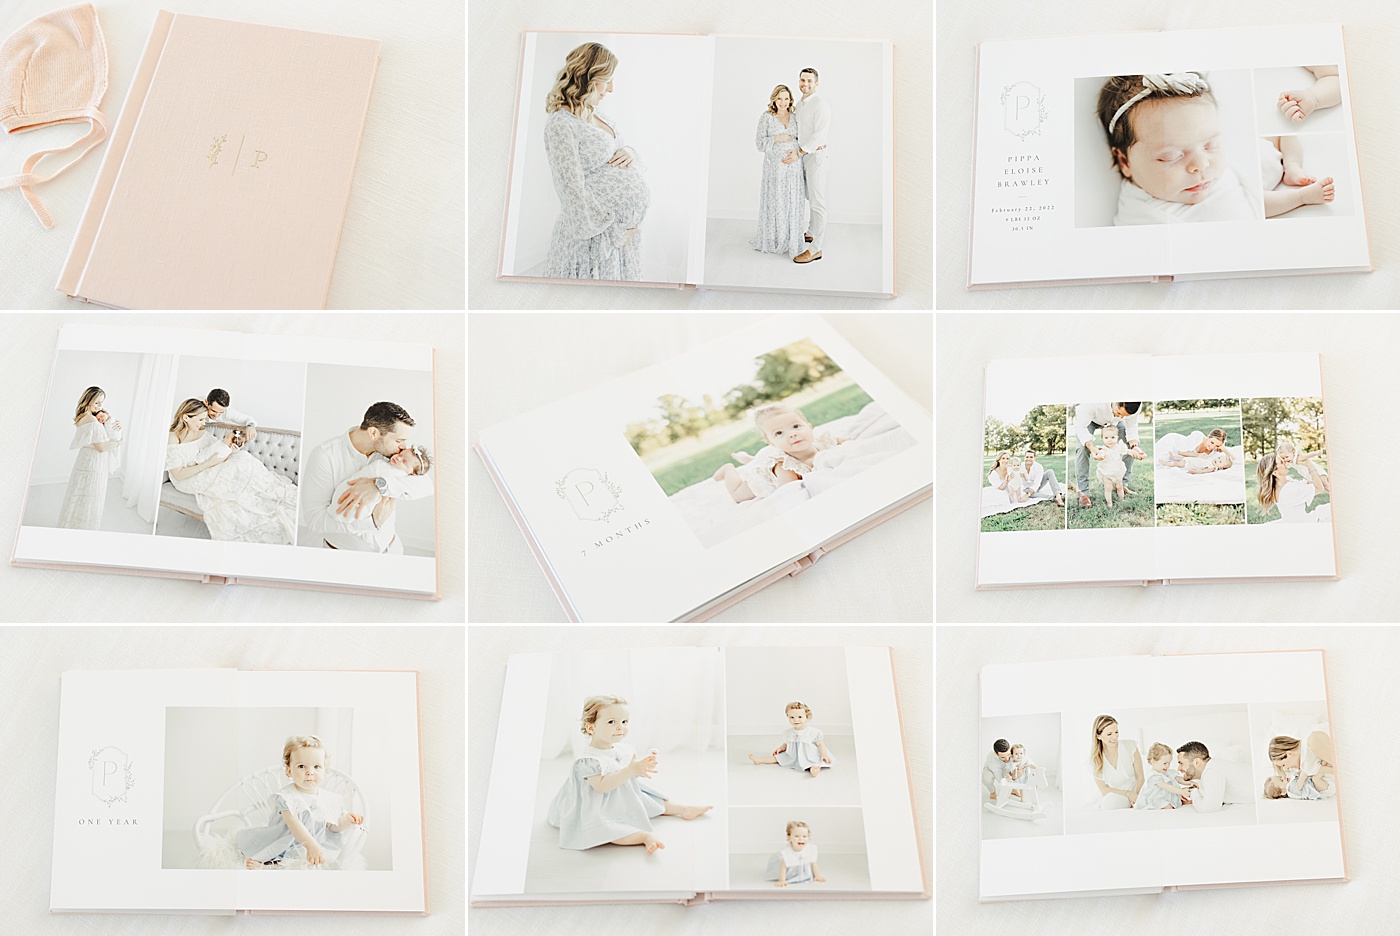 Baby's first year in photos in an heirloom album. Photos and album design by Kristin Wood Photography.